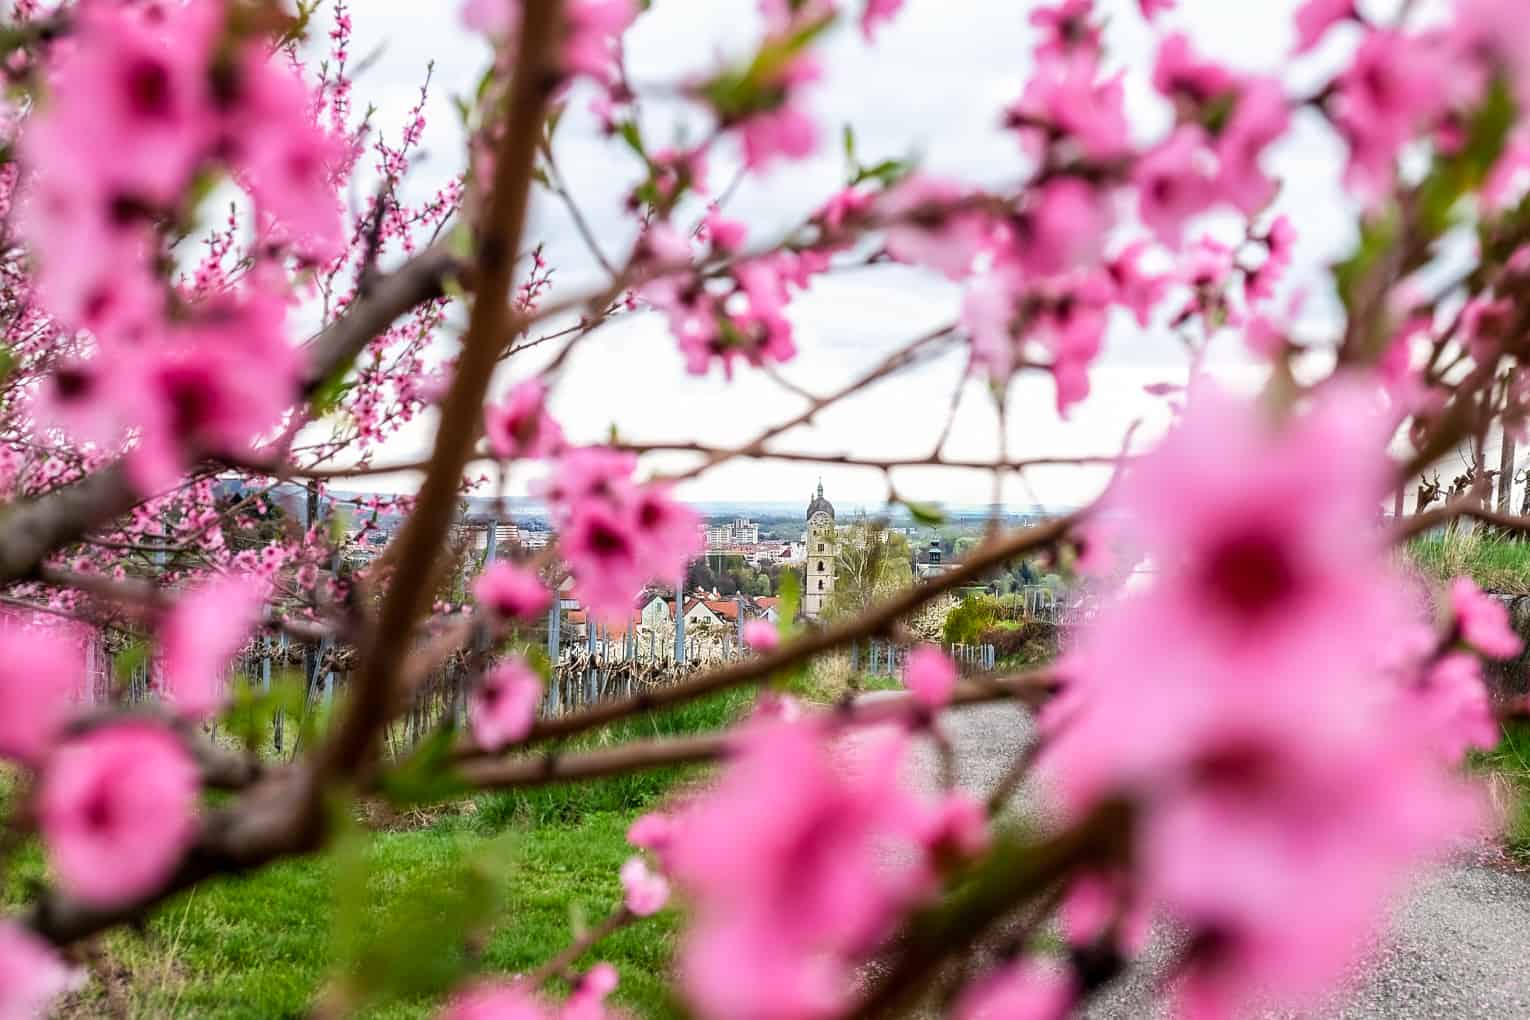 A far view to the city of Krems, Austria through some bright pink flower blossoms in a vineyard